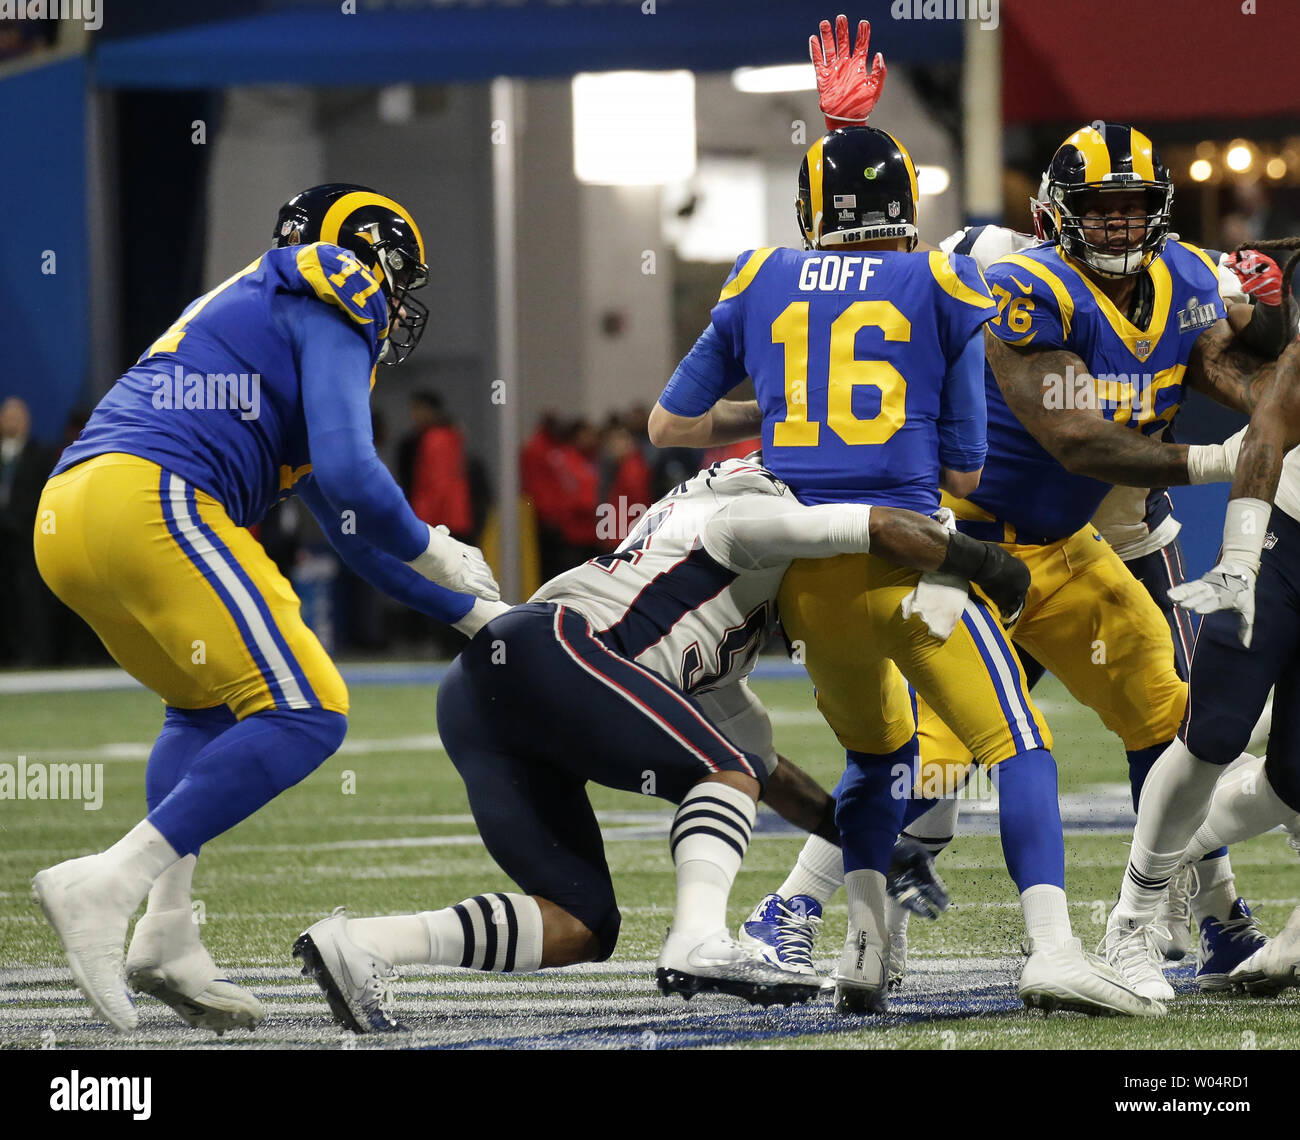 New Englands Patriots linebacker Don'a Hightower (C) sacks Los Angeles Rams  quarterback Jared Goff (16) during the last minute of play in the second  quarter of Super Bowl LIII at Mercedes-Benz Stadium